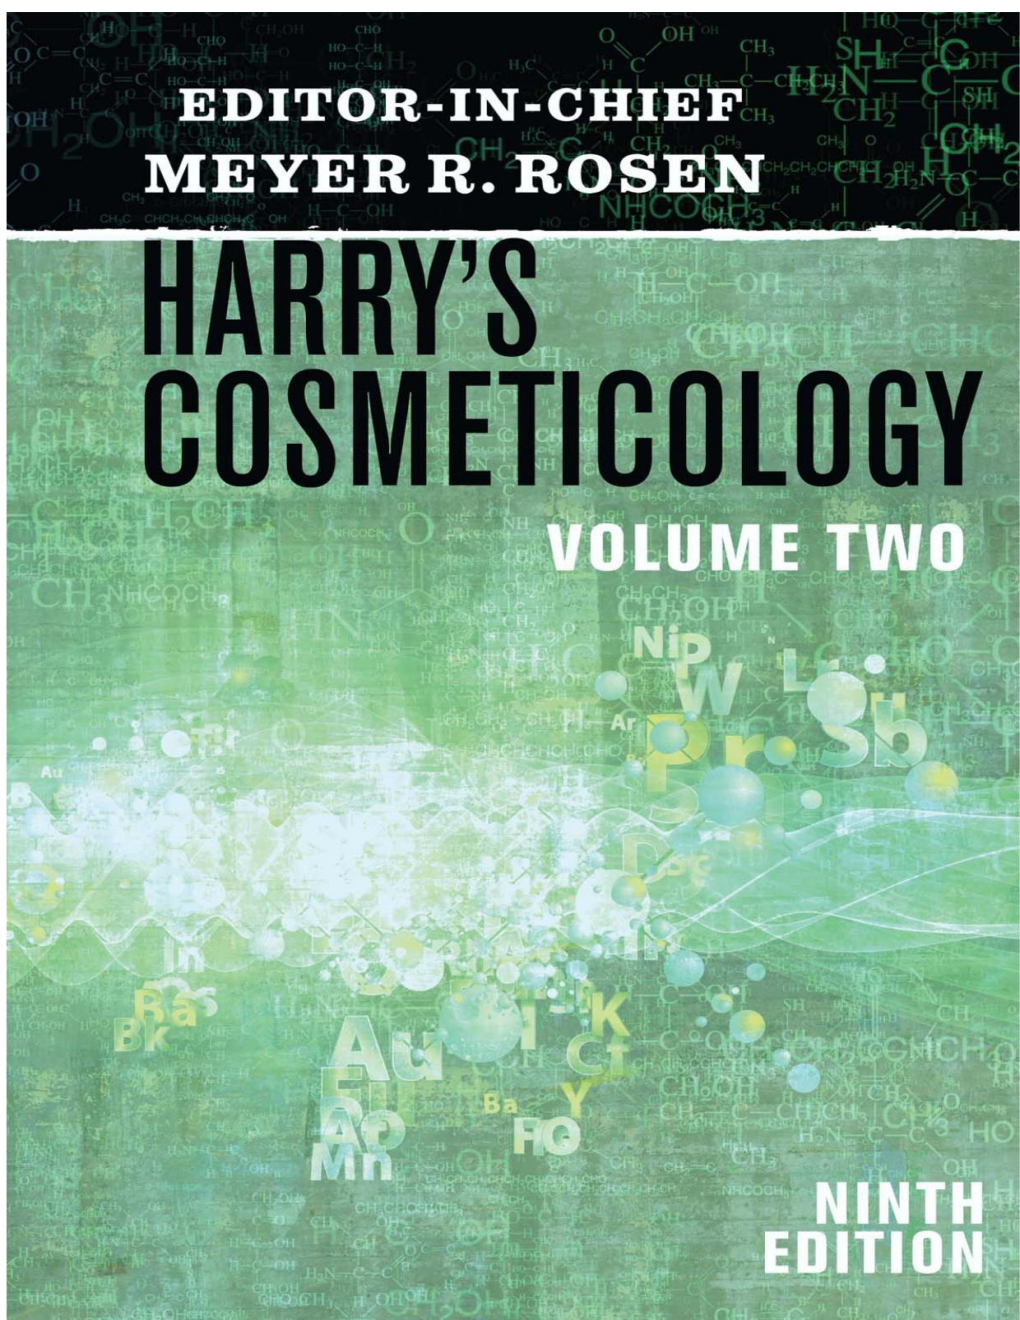 Harry's Cosmeticology 9Th Edition Volume 2